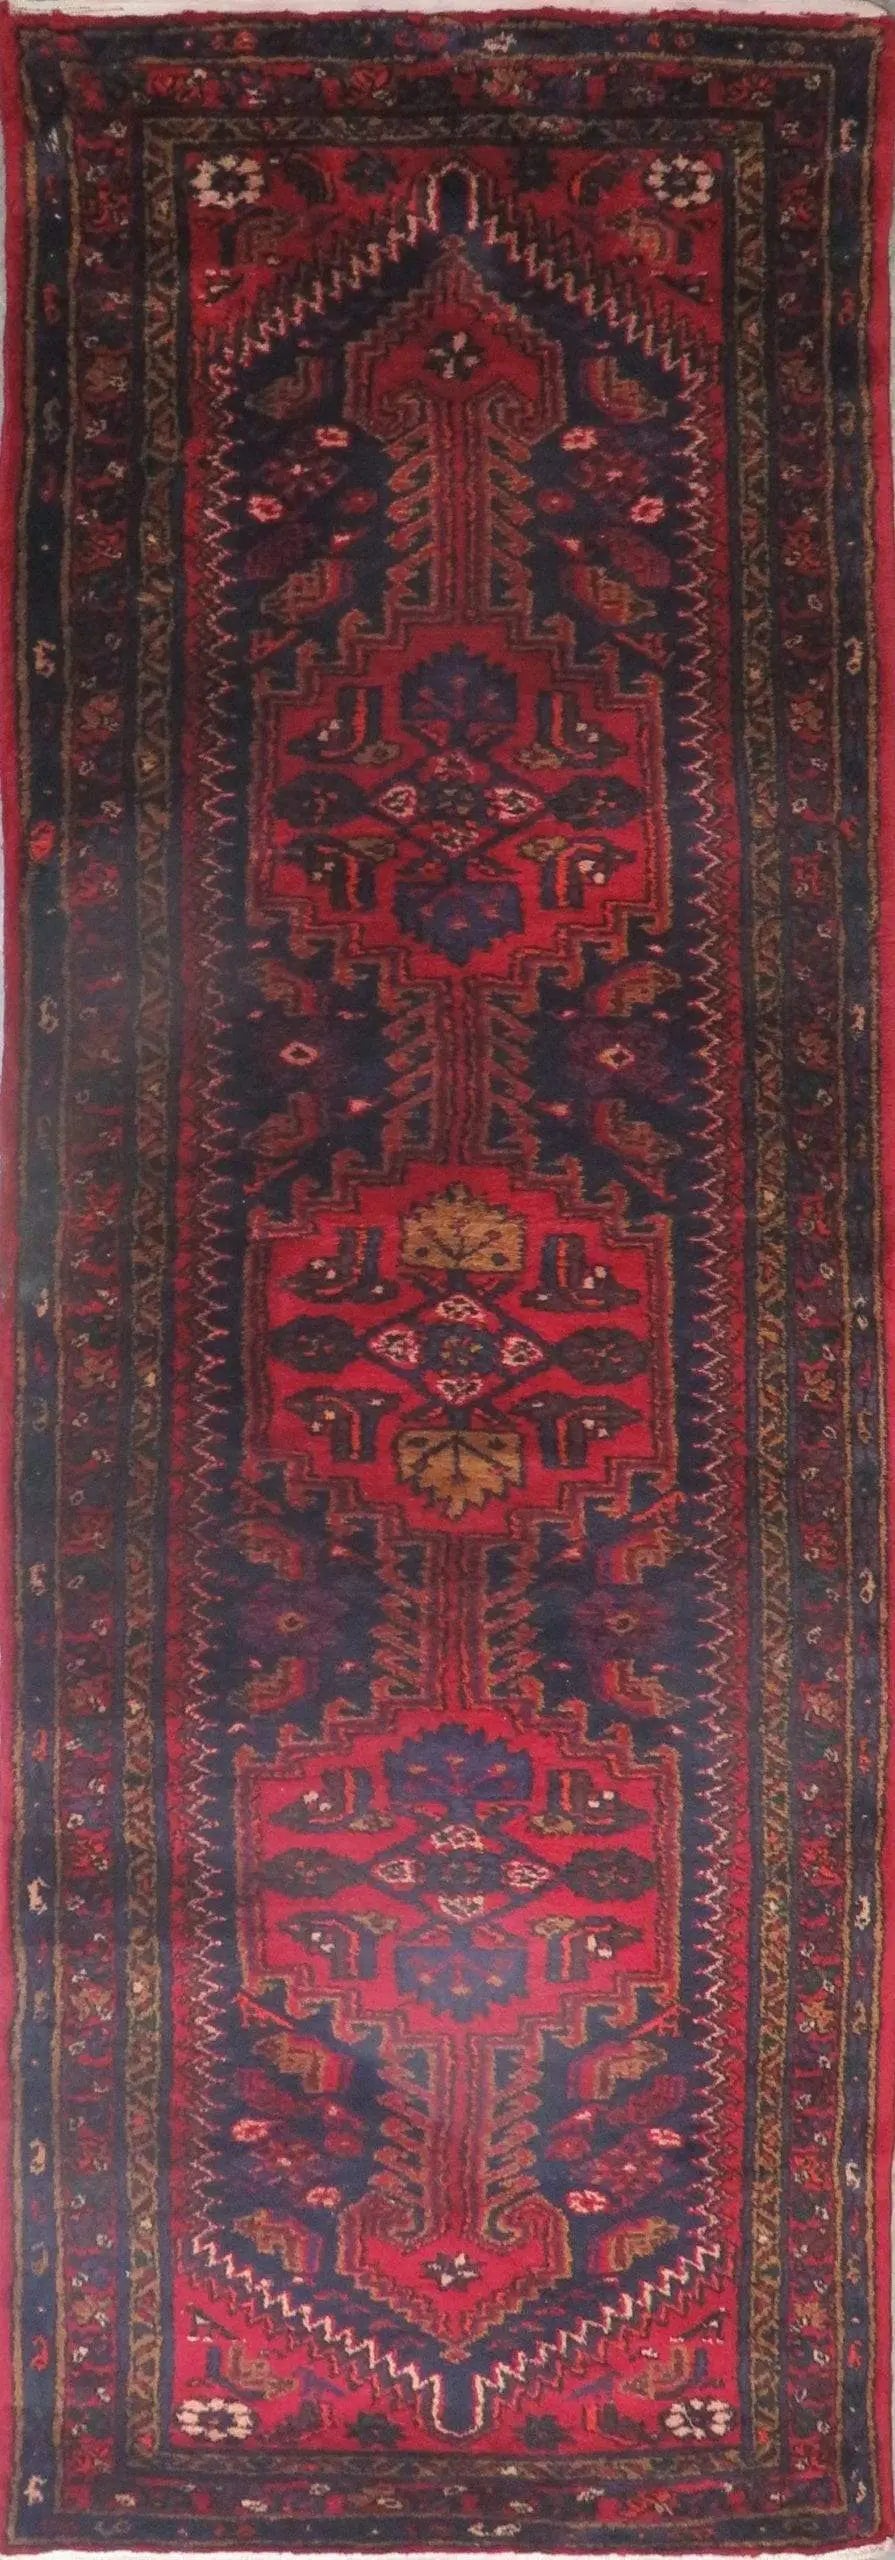 Hand-Knotted Persian Wool Rug _ Luxurious Vintage Design, 10'7" x 3'4", Artisan Crafted